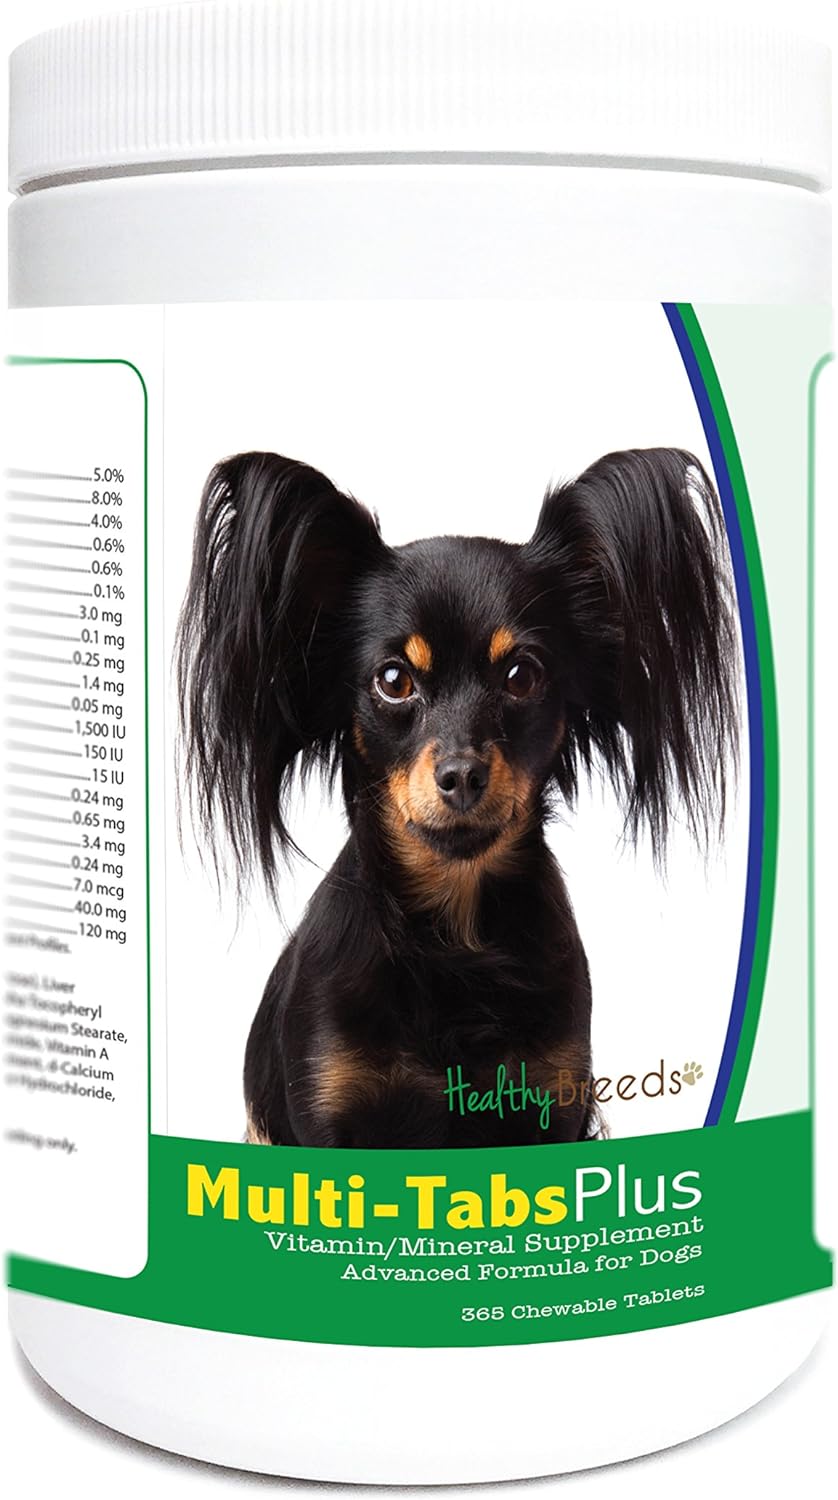 Healthy Breeds Russian Toy Terrier Multi-Tabs Plus Chewable Tablets 365 Count : Pet Supplies